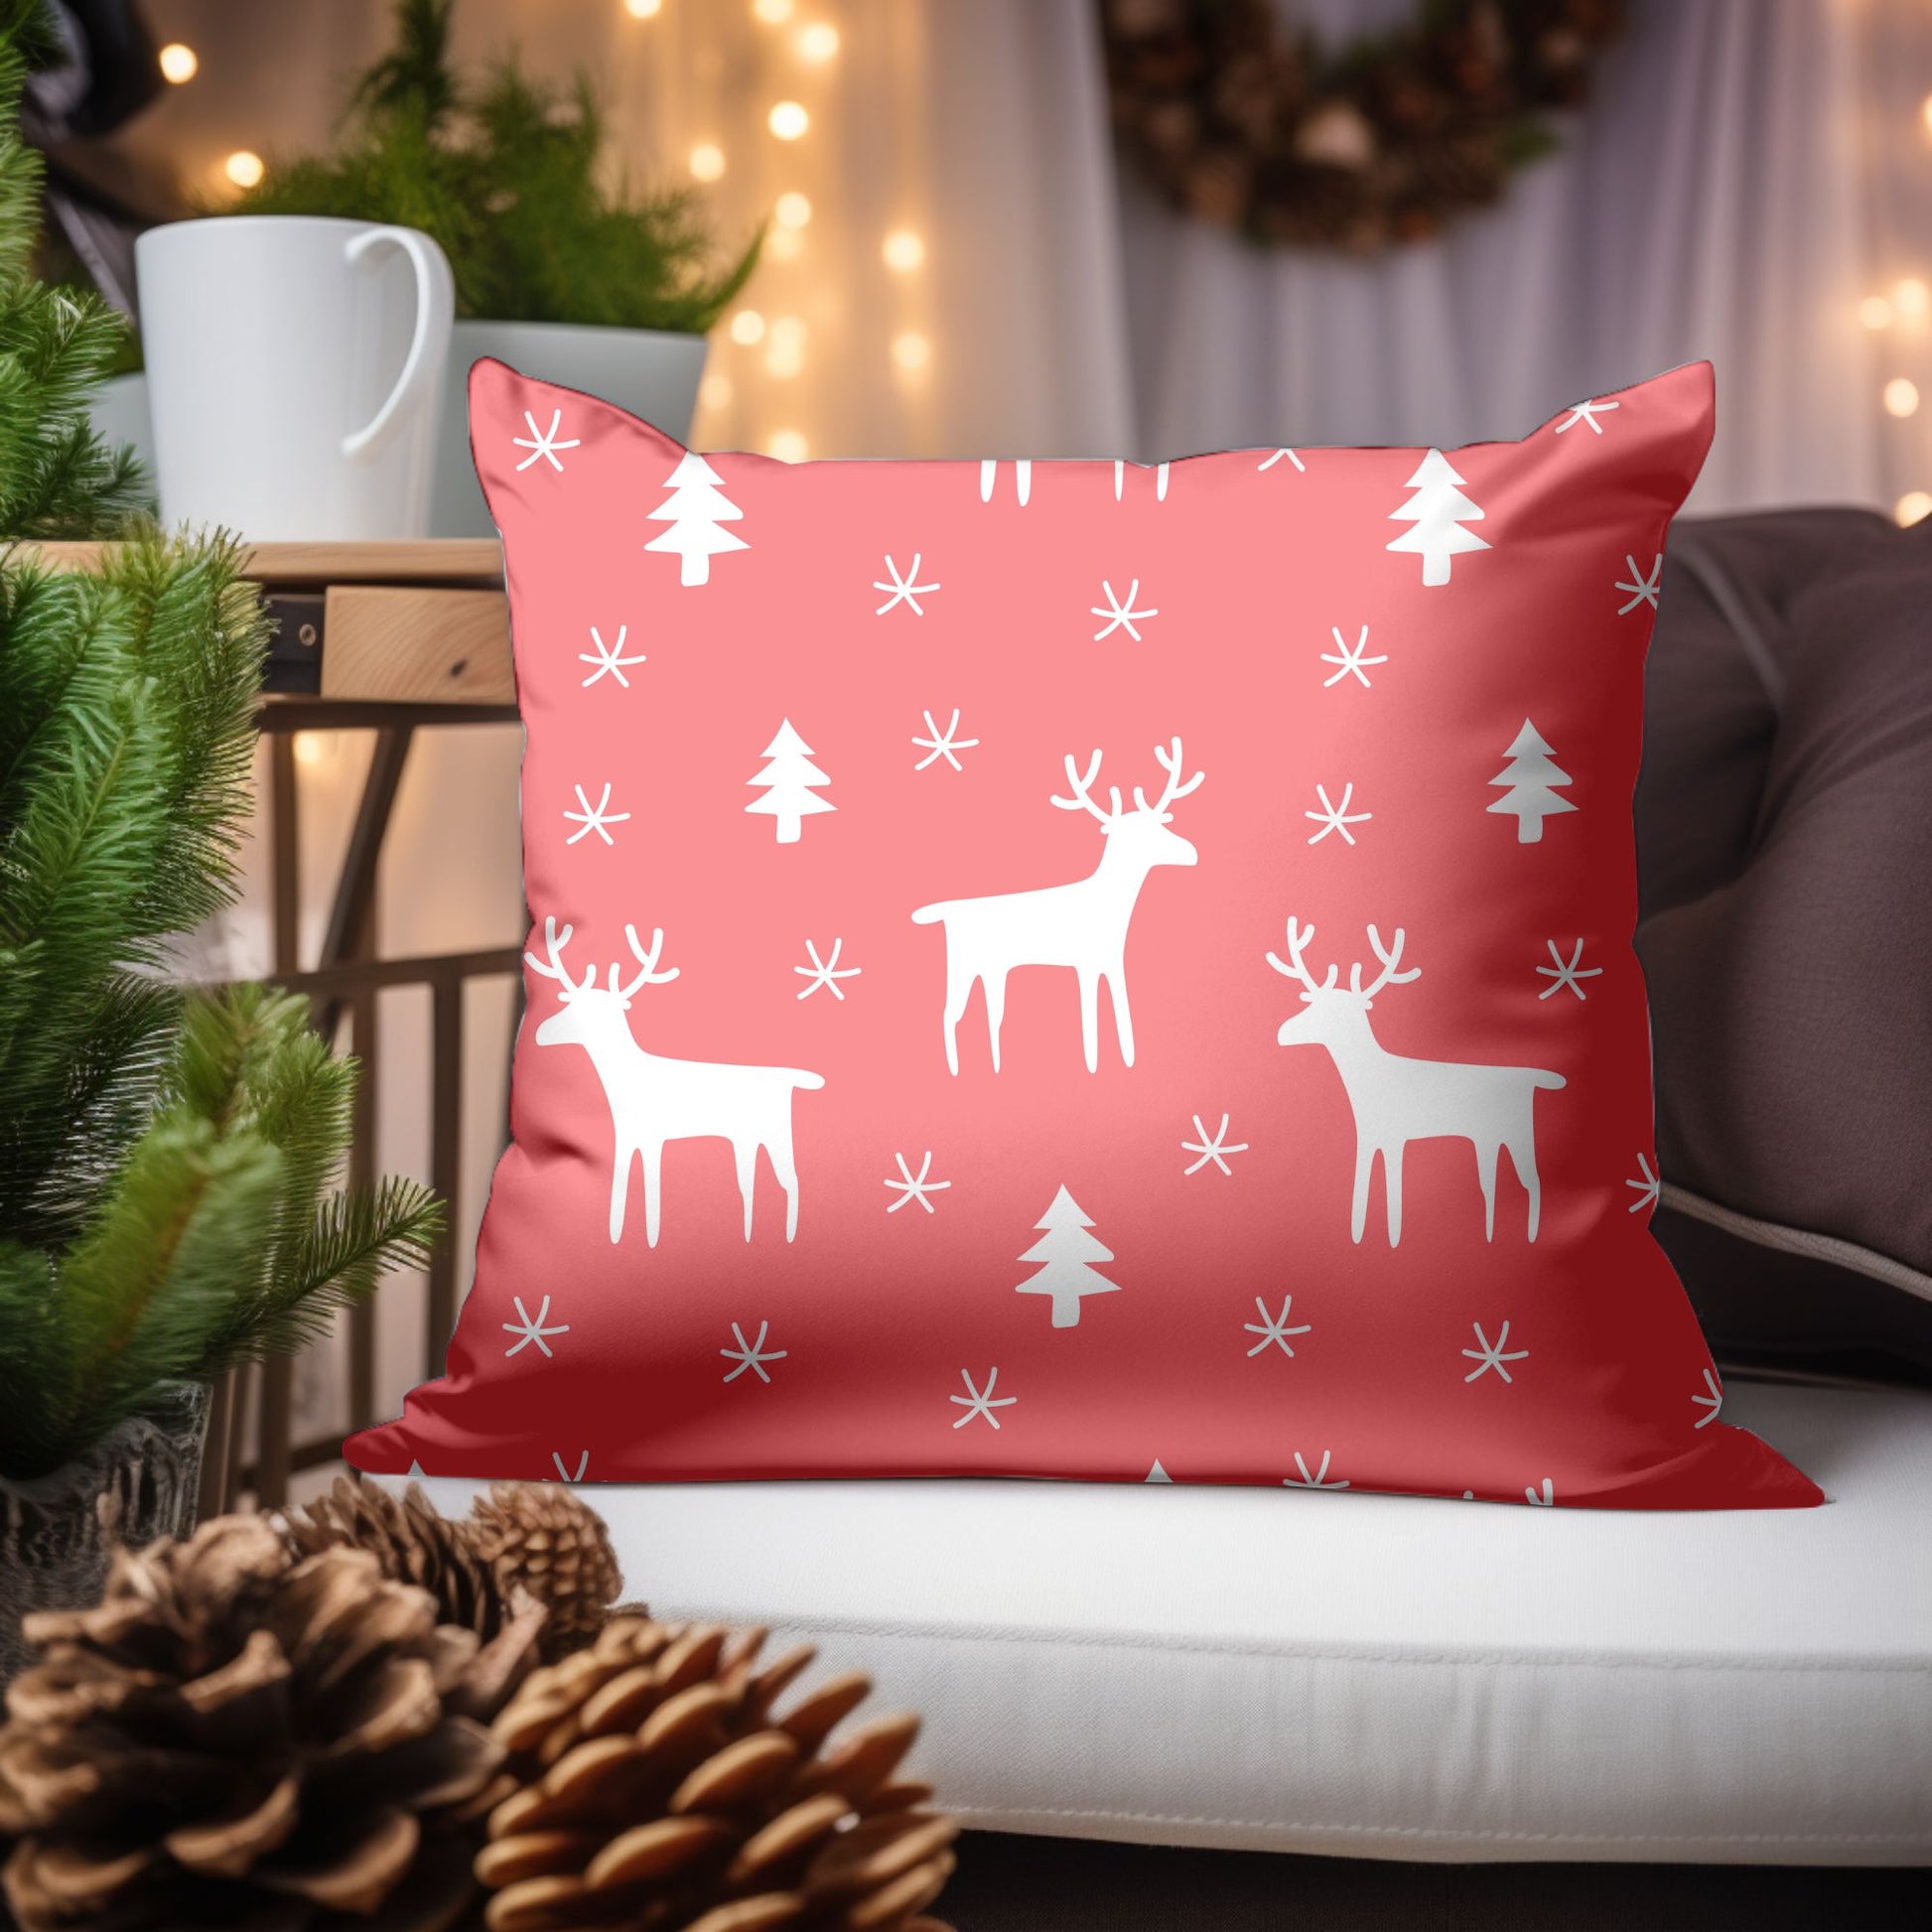 Detail of the Red Christmas Design on the Festive Pillow